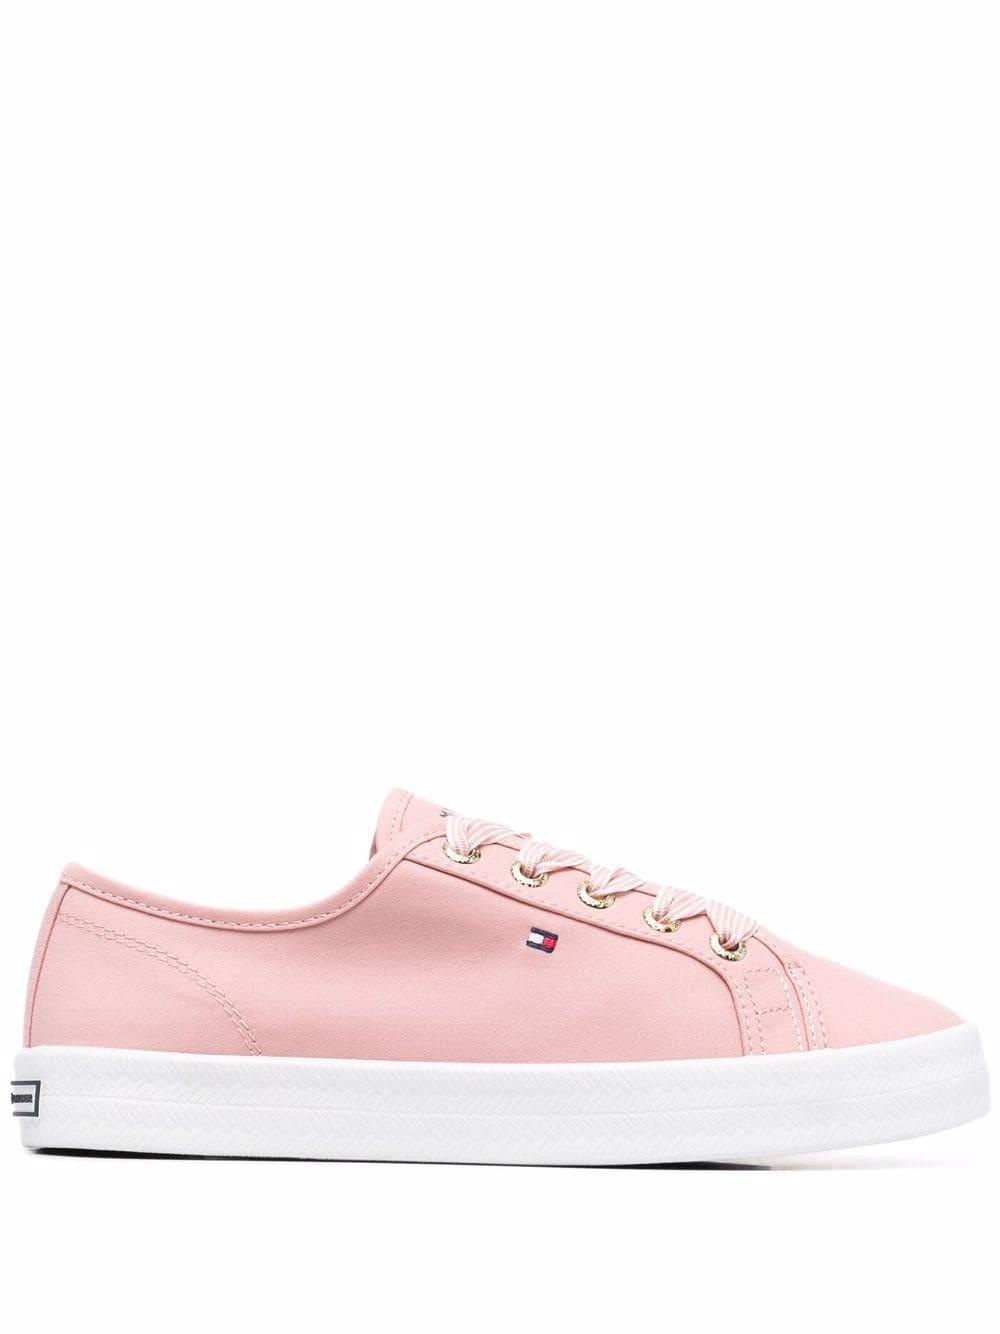 Tommy Hilfiger Essential Nautical Sneakers in Pink - Lyst